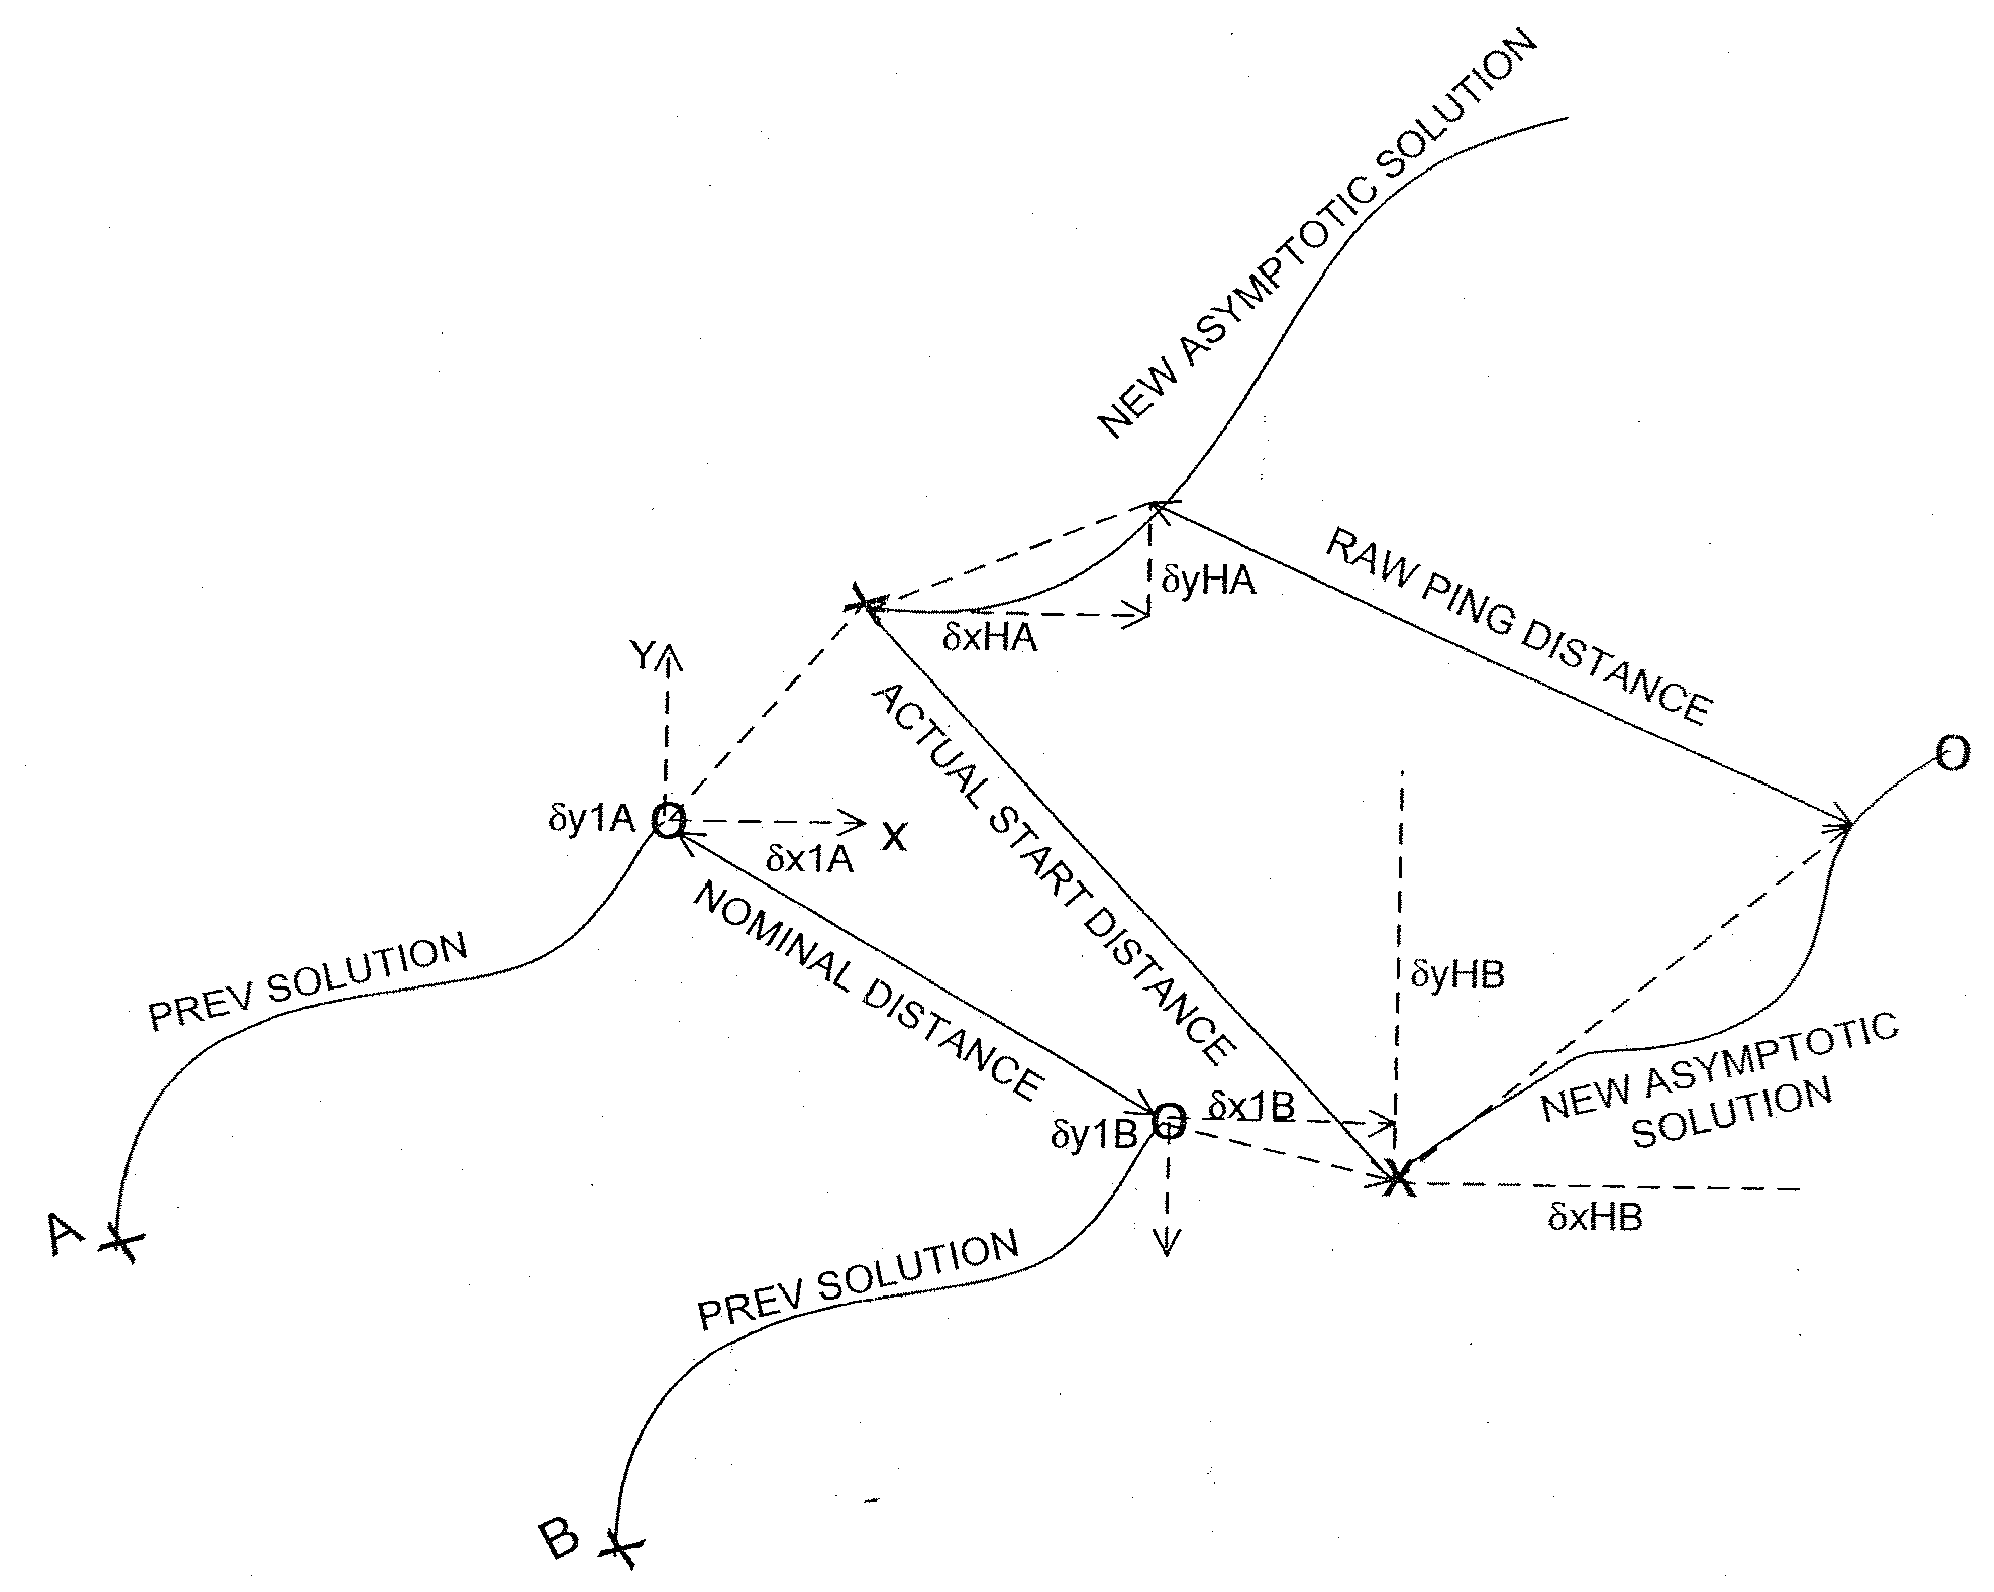 Harmonic block technique for computing space-time solutions for communication system network nodes